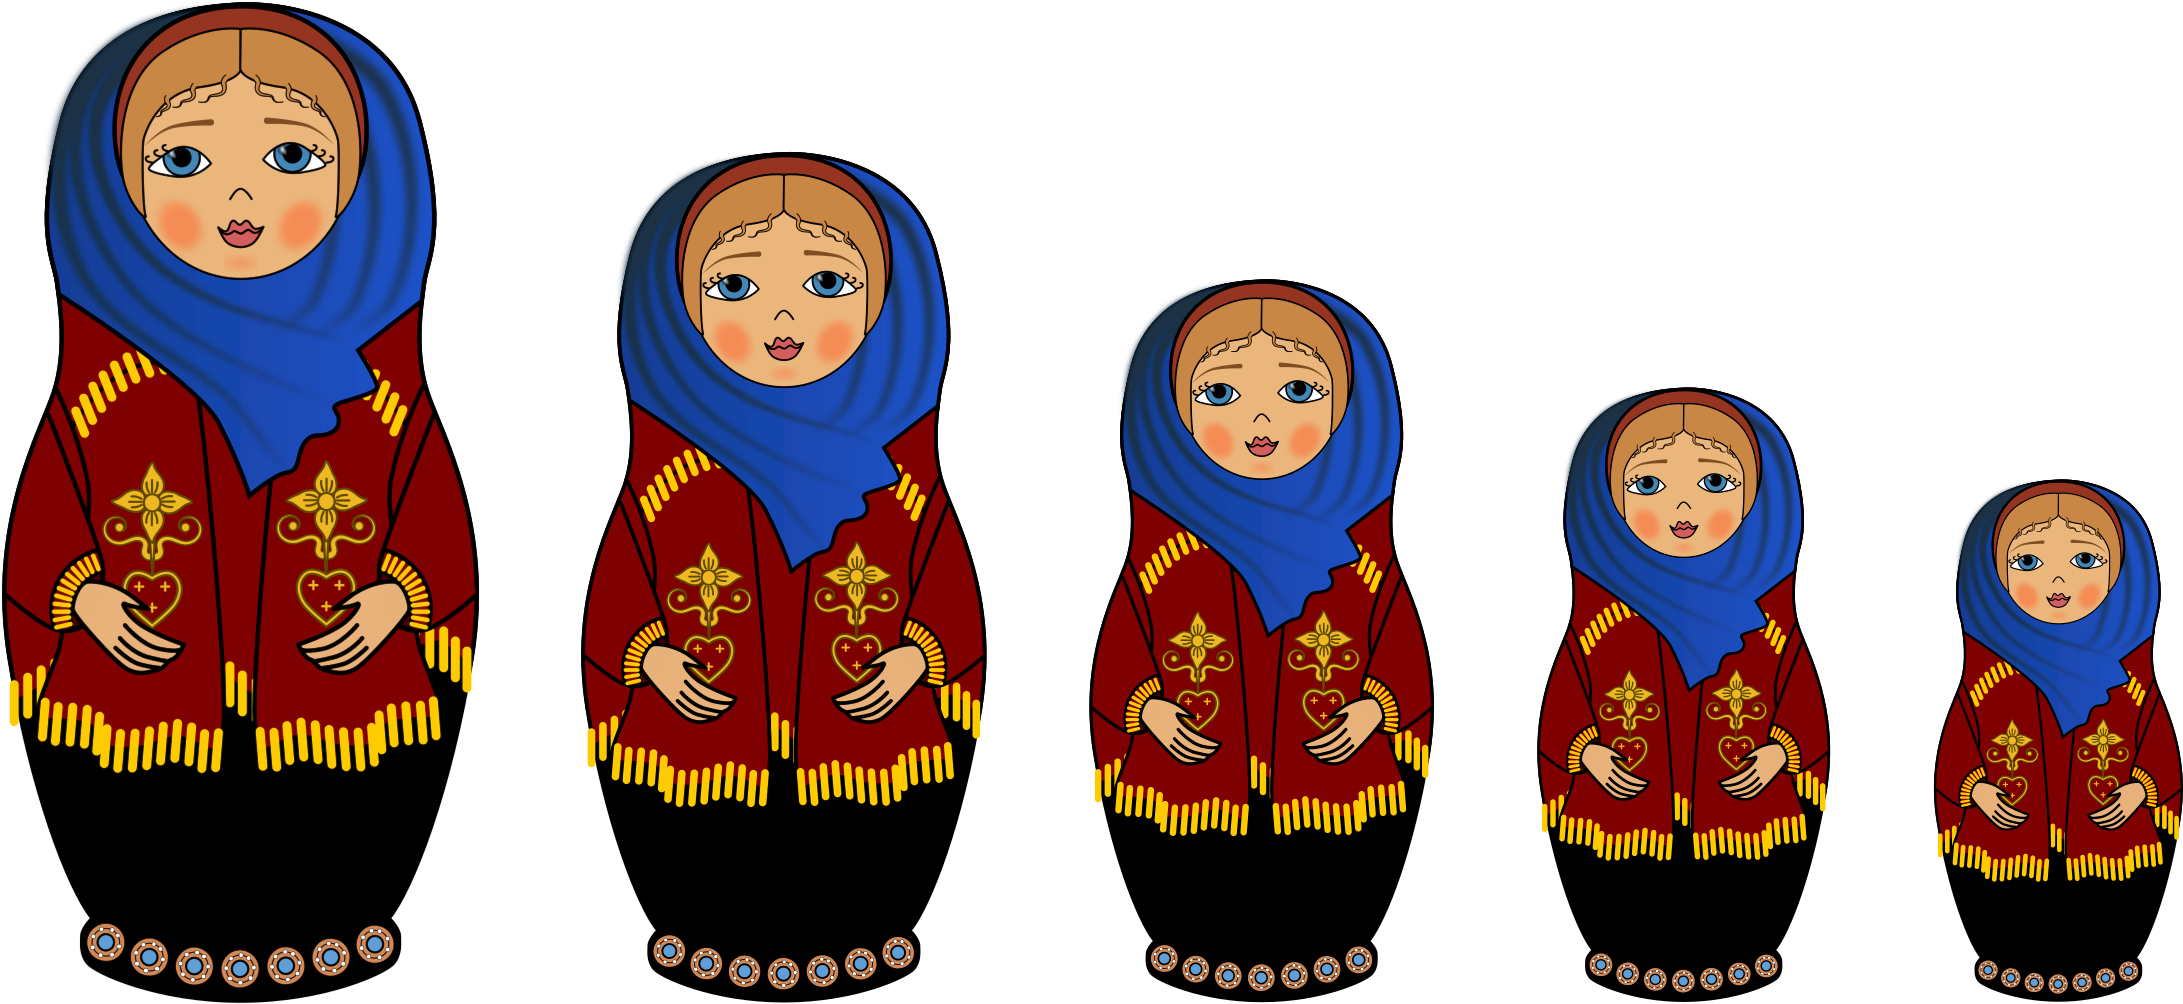 A Group Of Dolls With Different Poses